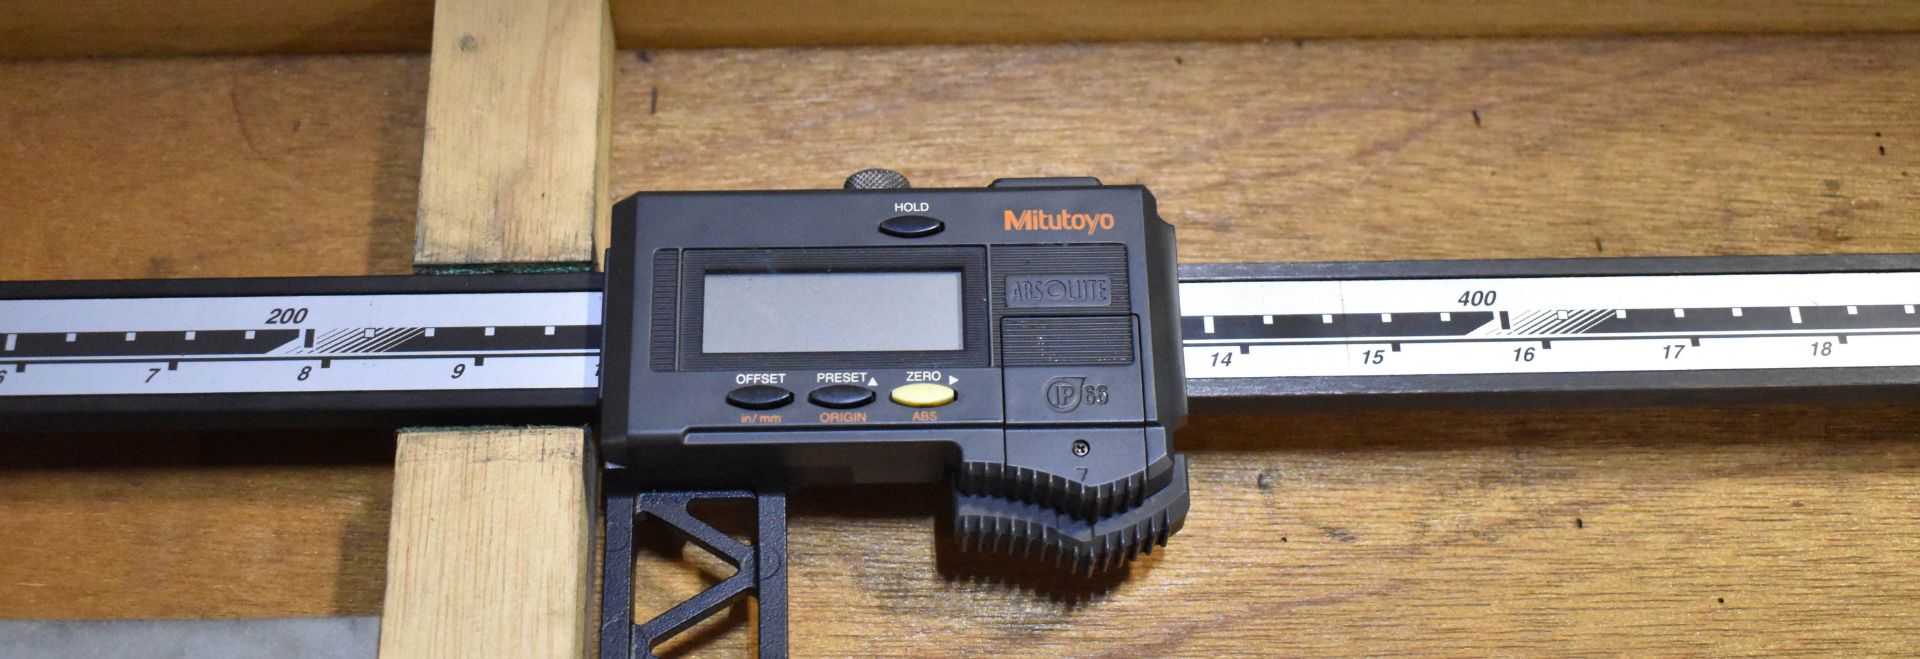 MITUTOYO 0"-24" DIGIMATIC CALIPER [RIGGING FEES FOR LOT #158 - $10 USD PLUS APPLICABLE TAXES] - Image 2 of 2